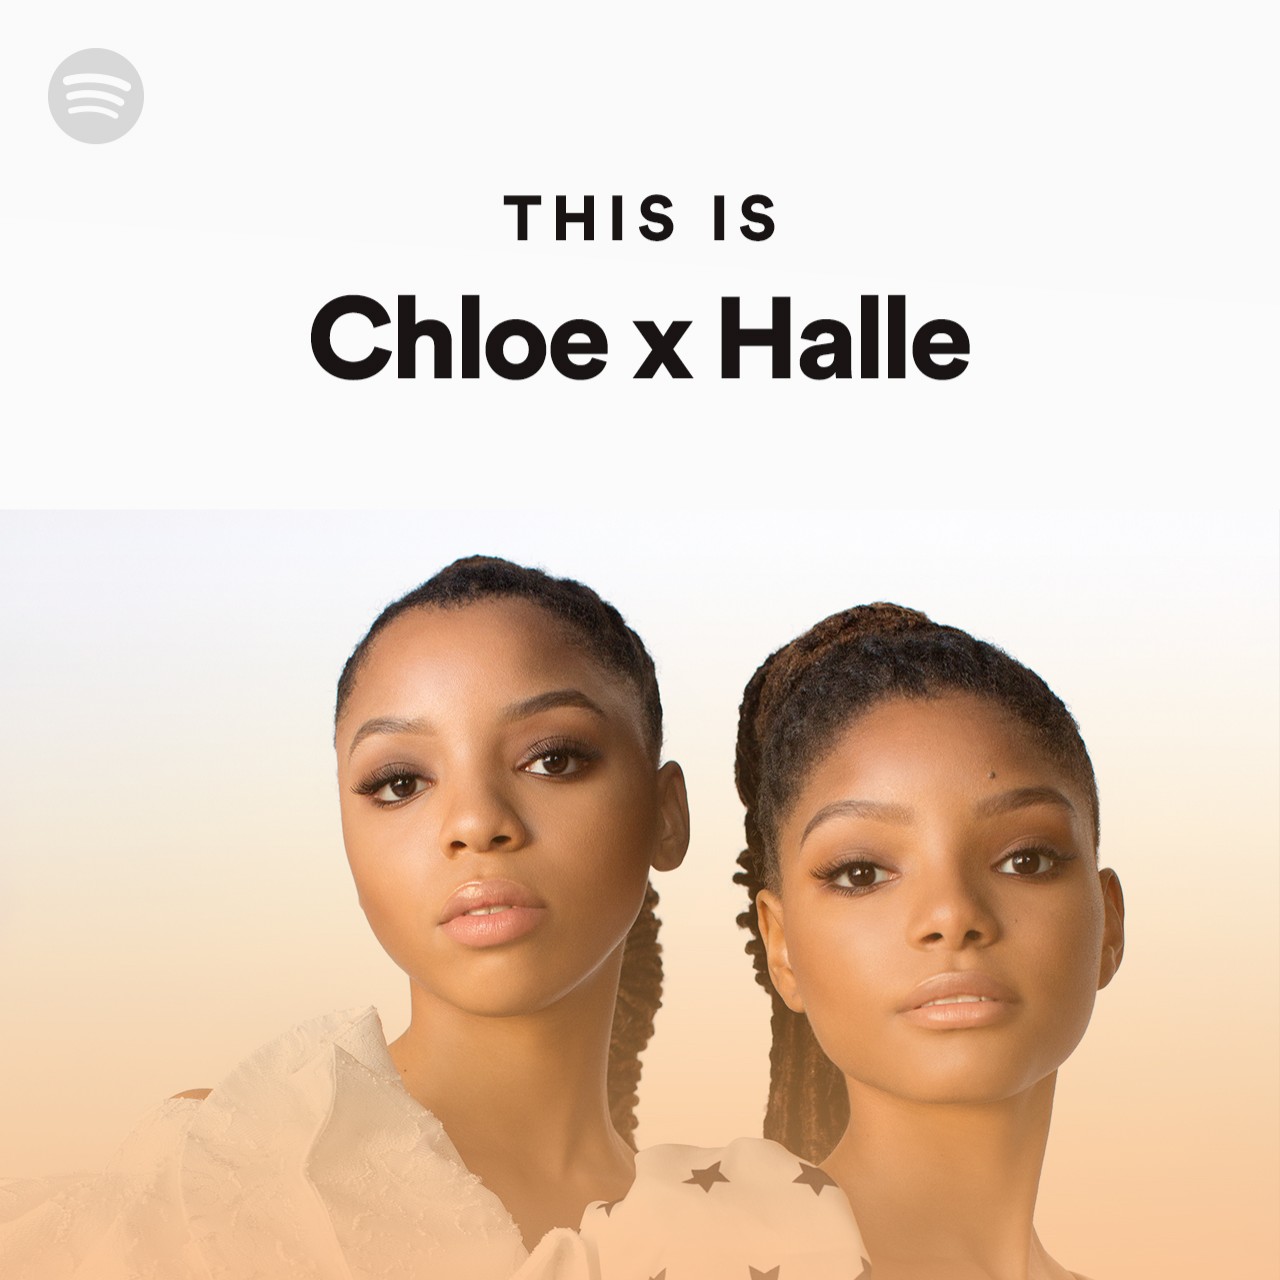 This Is Chloe x Halle